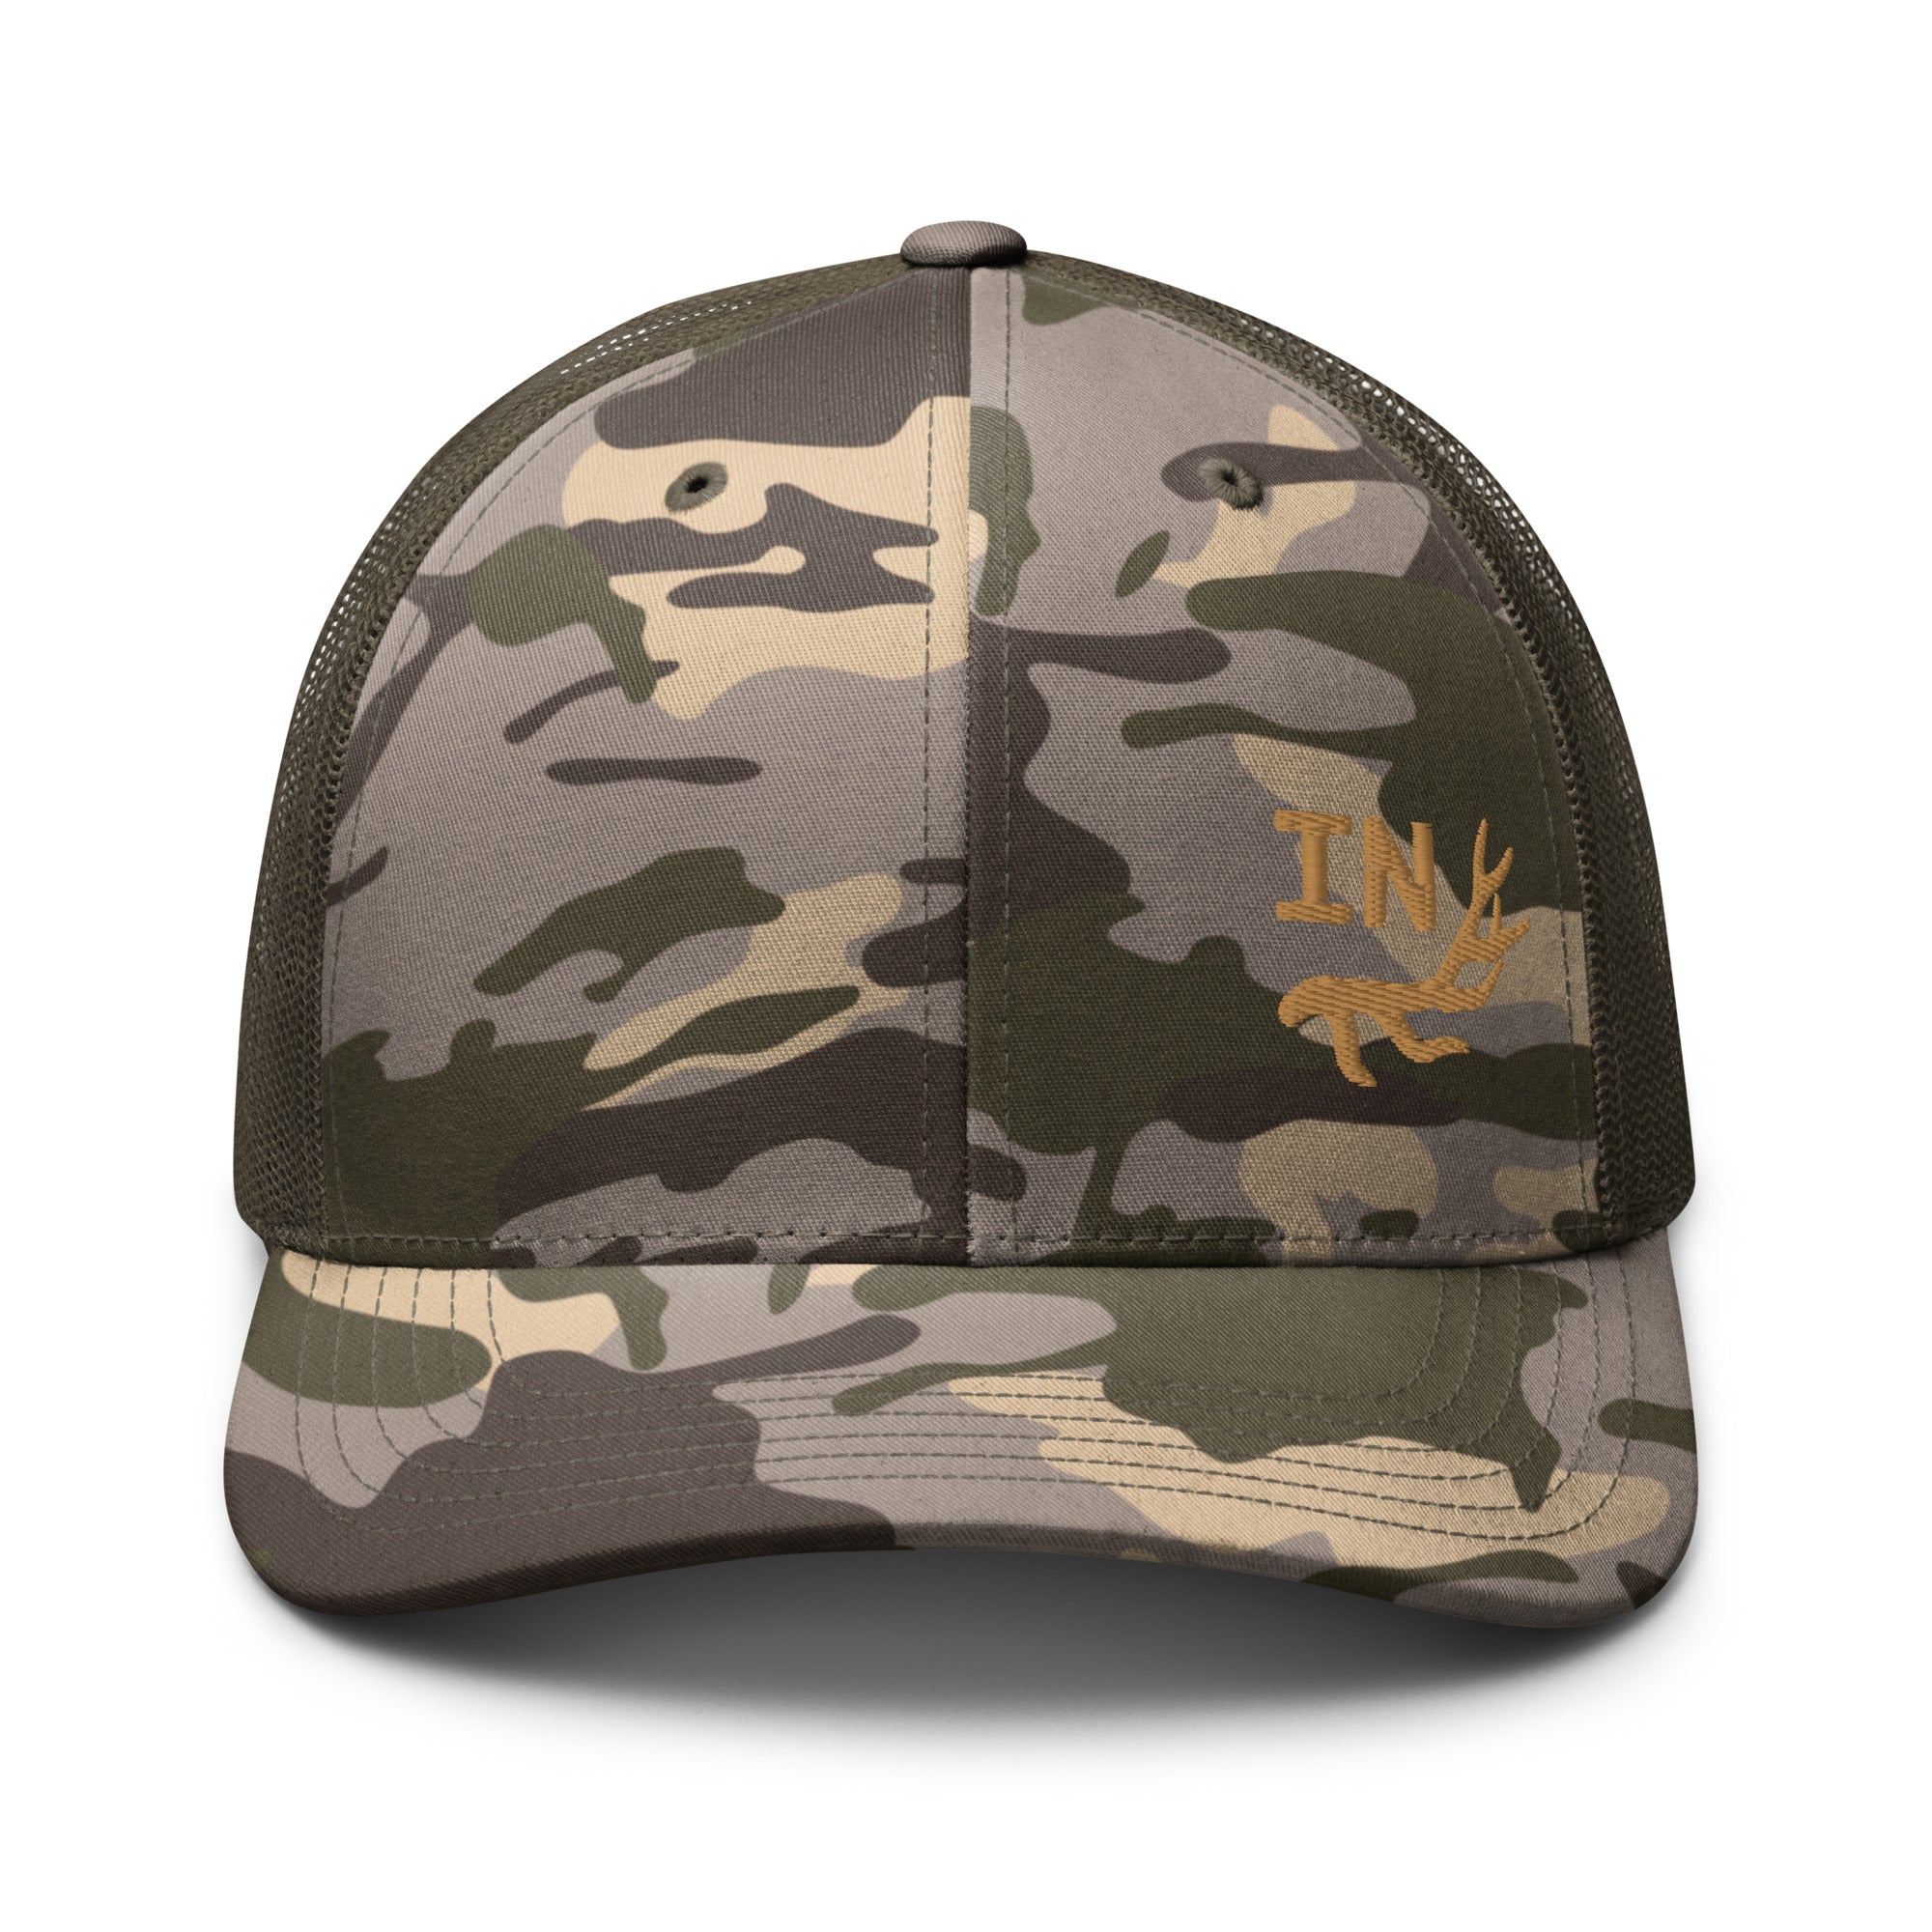 camouflage-trucker-hat-camo-olive-front-655e61369d716.jpg